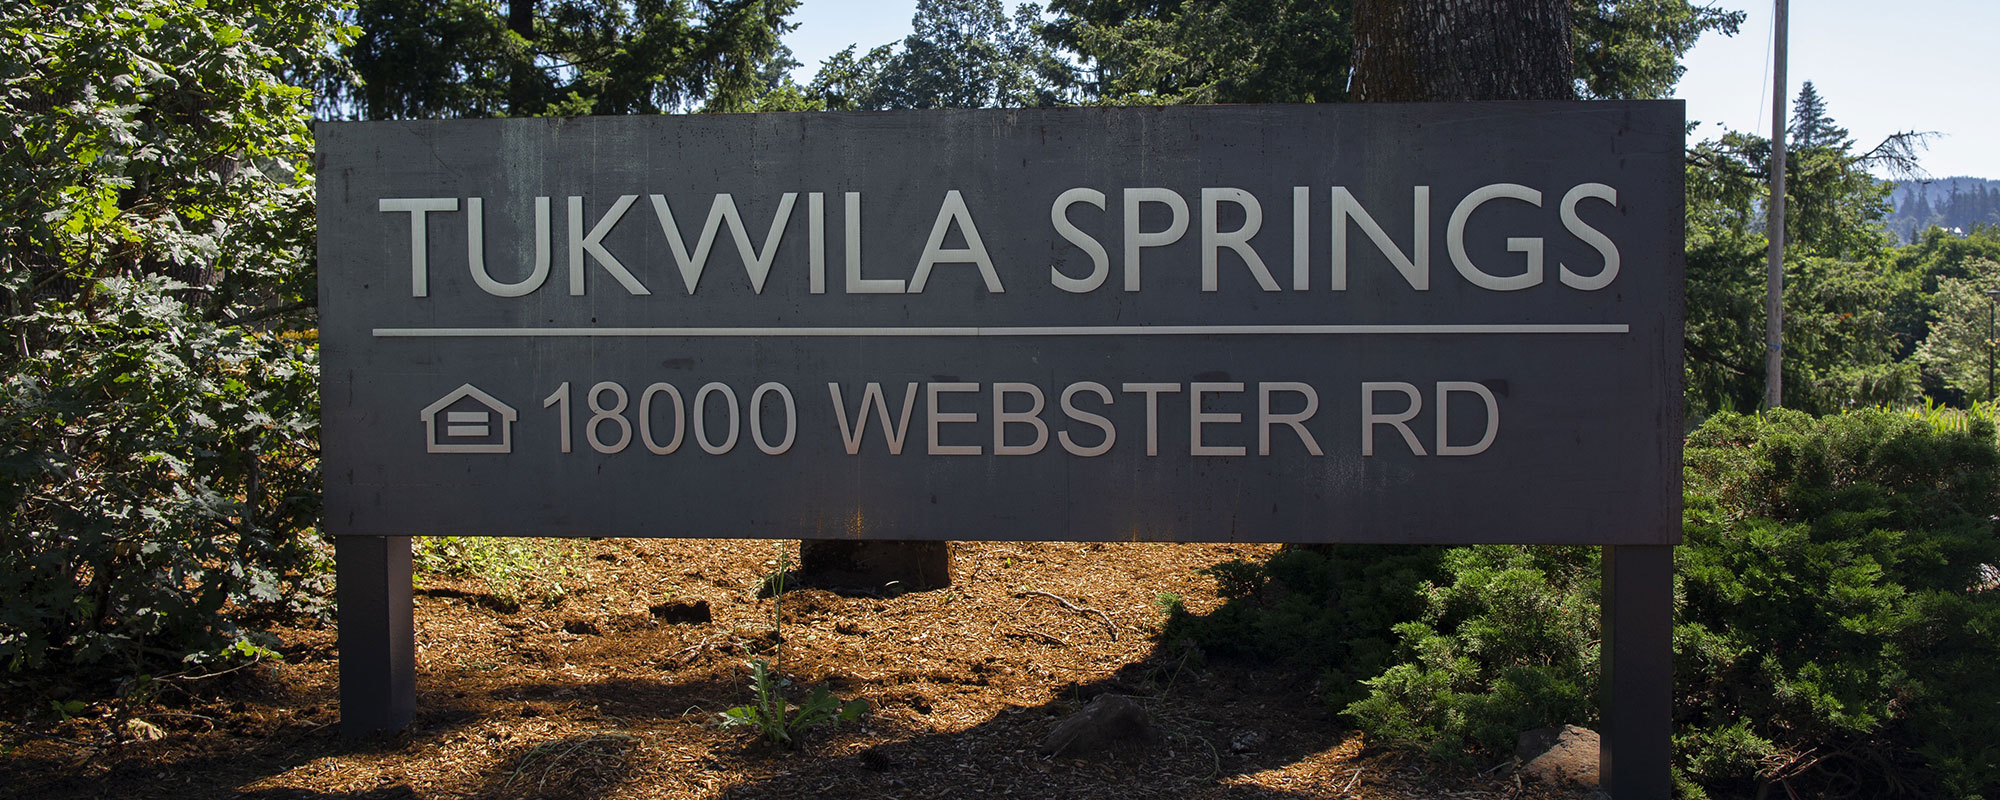 Sign in front of the Tukwila Springs building